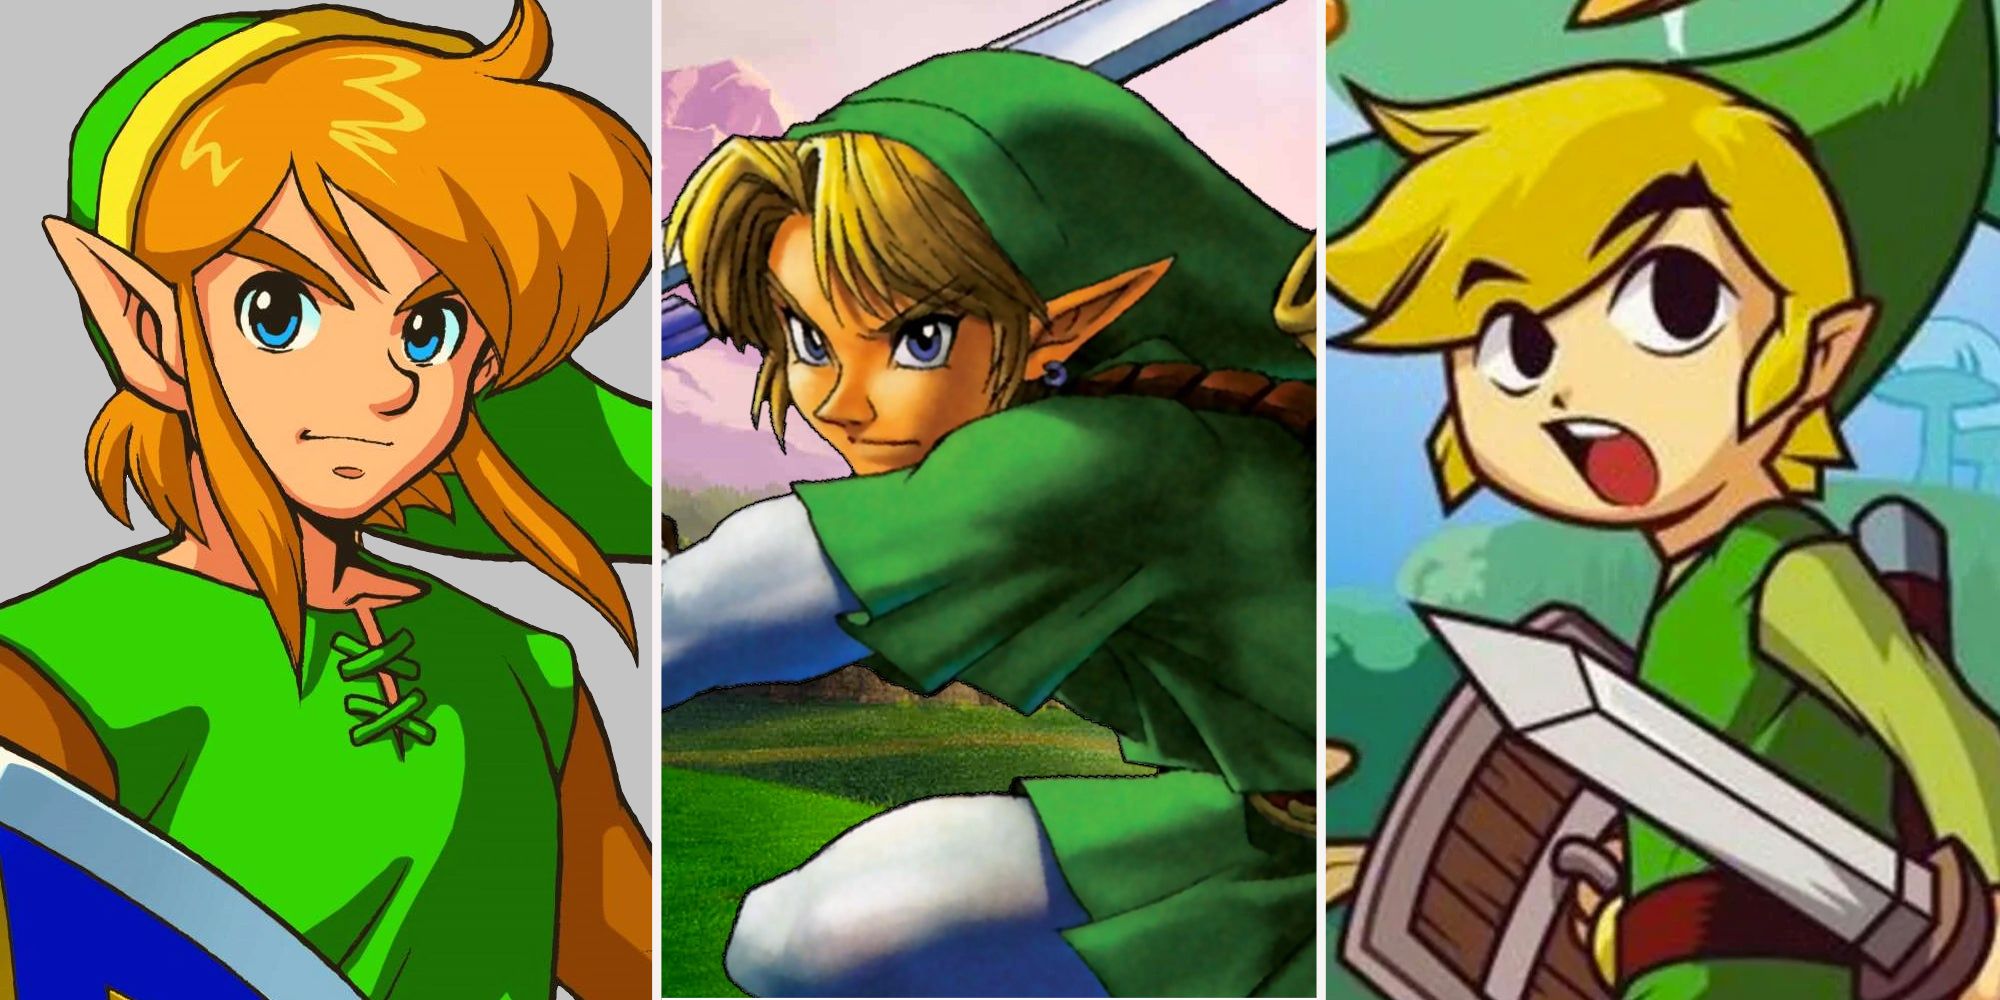 Review: The Legend of Zelda - Ocarina of Time » Old Game Hermit